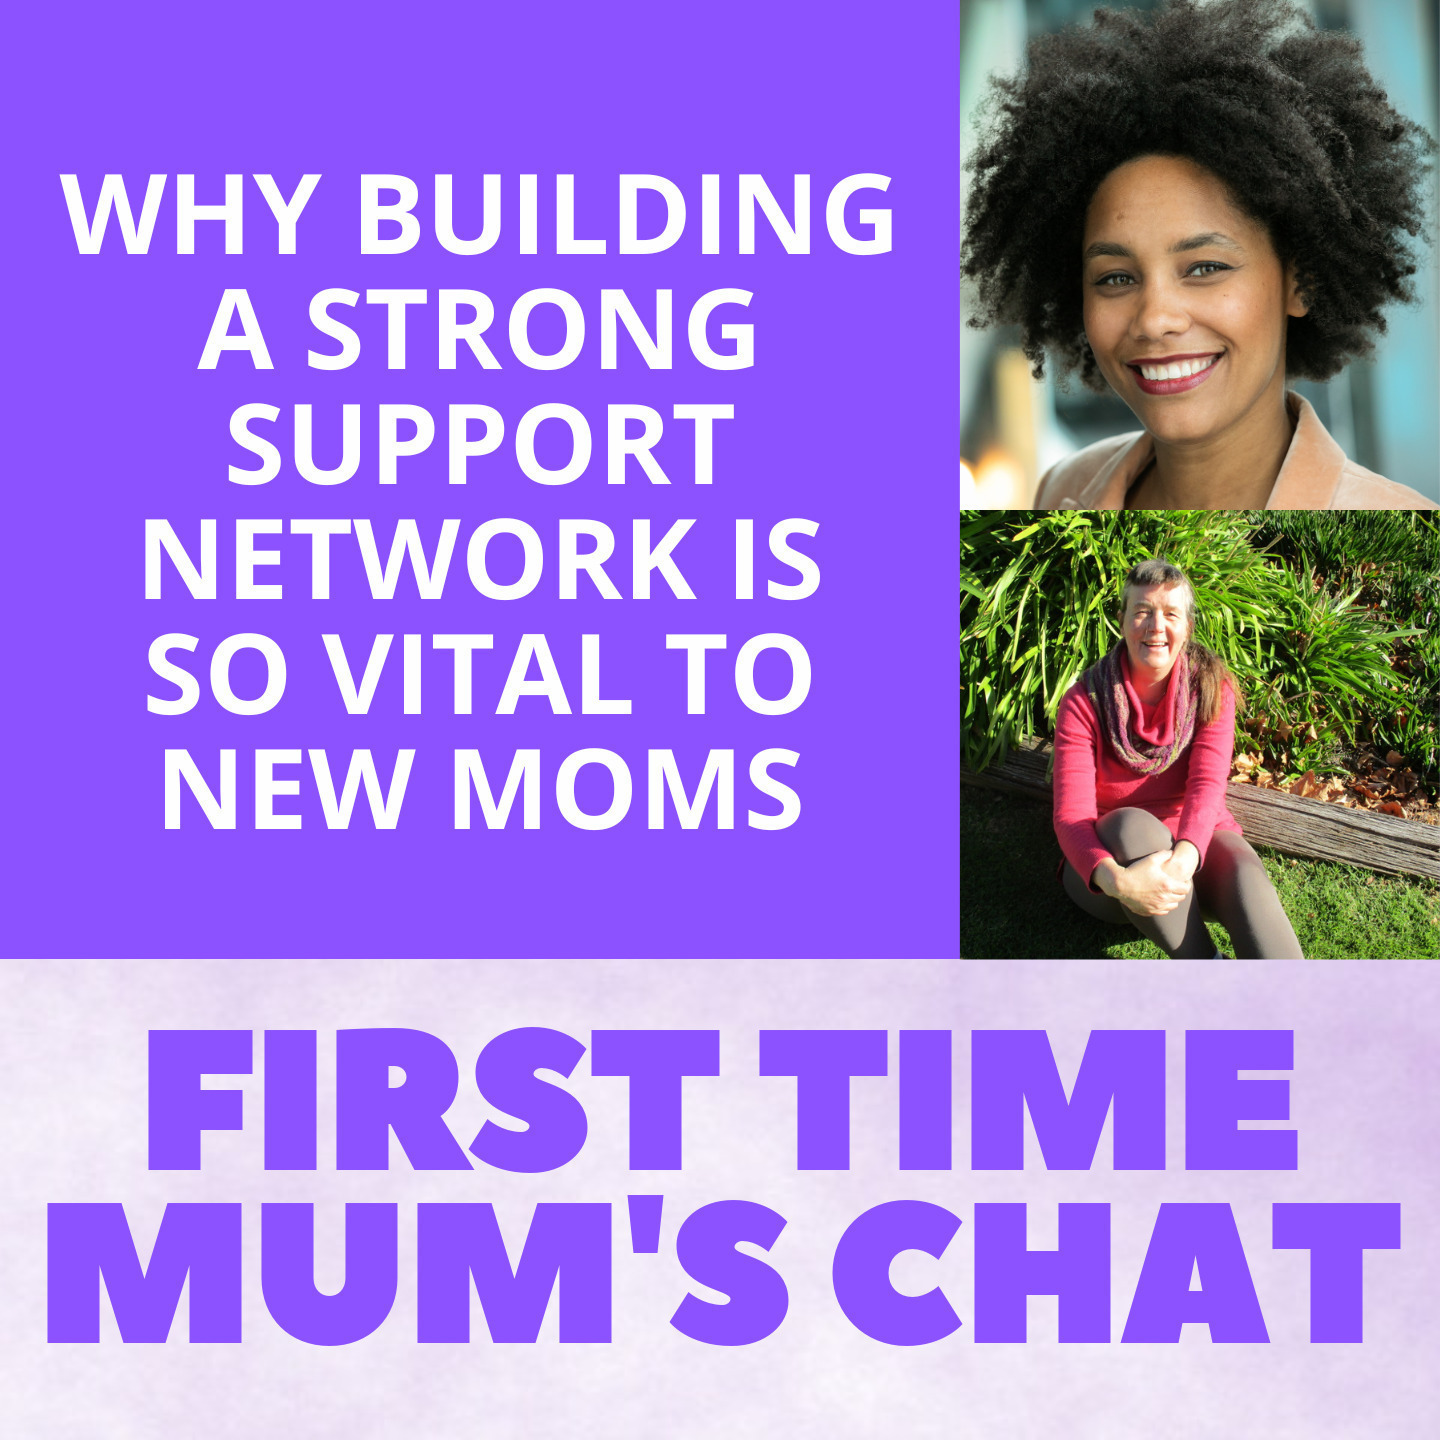 Why Building a Strong Support Network is so Vital to New Moms